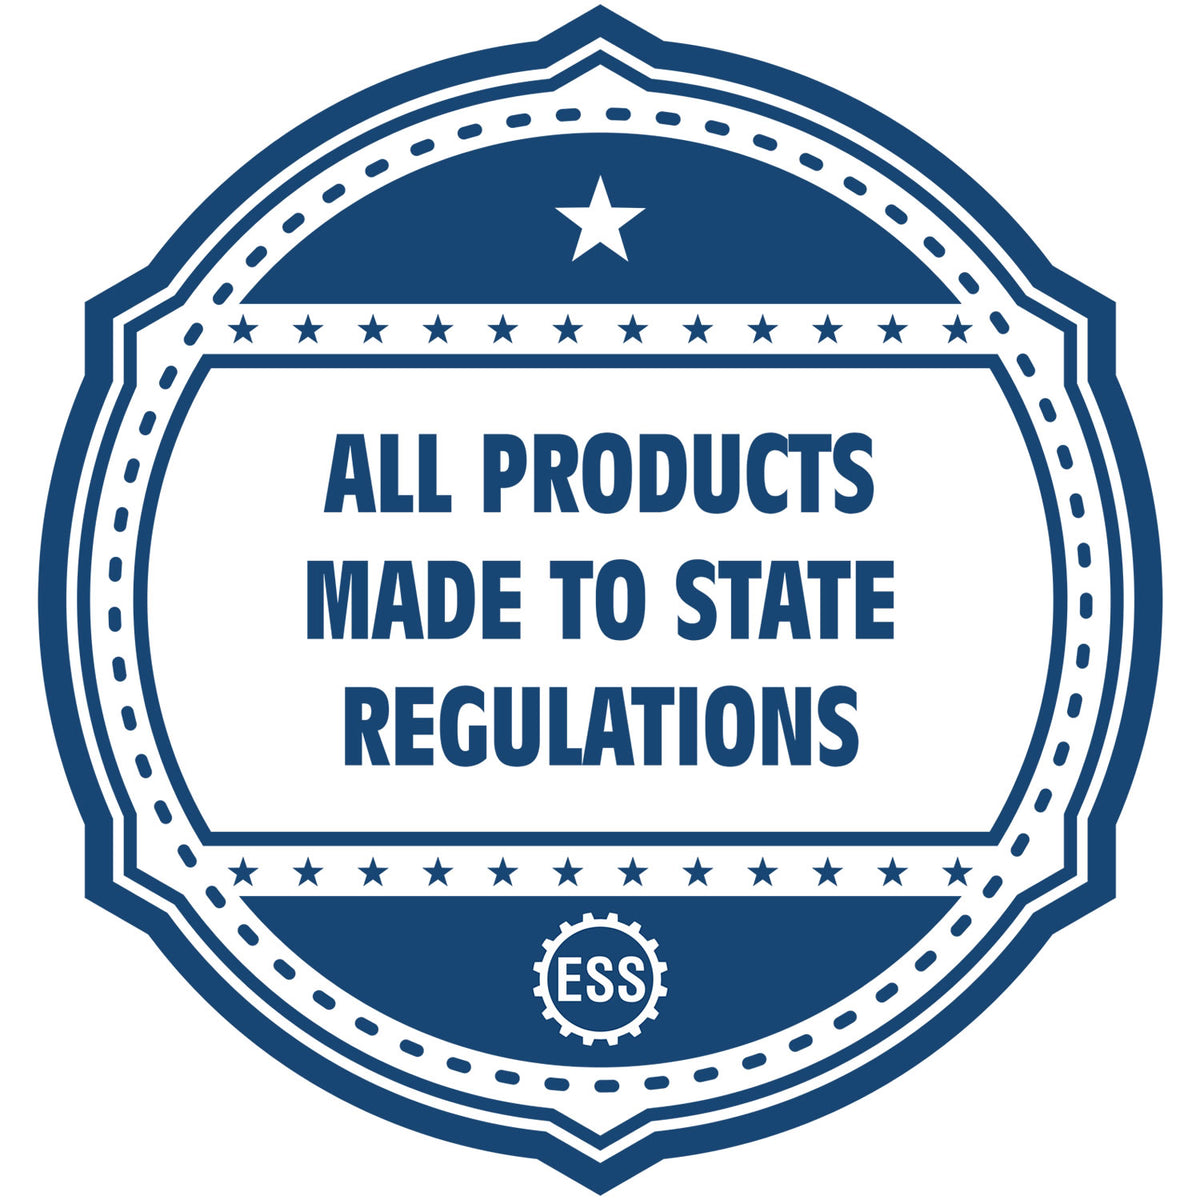 An icon or badge element for the Wooden Handle West Virginia State Seal Notary Public Stamp showing that this product is made in compliance with state regulations.